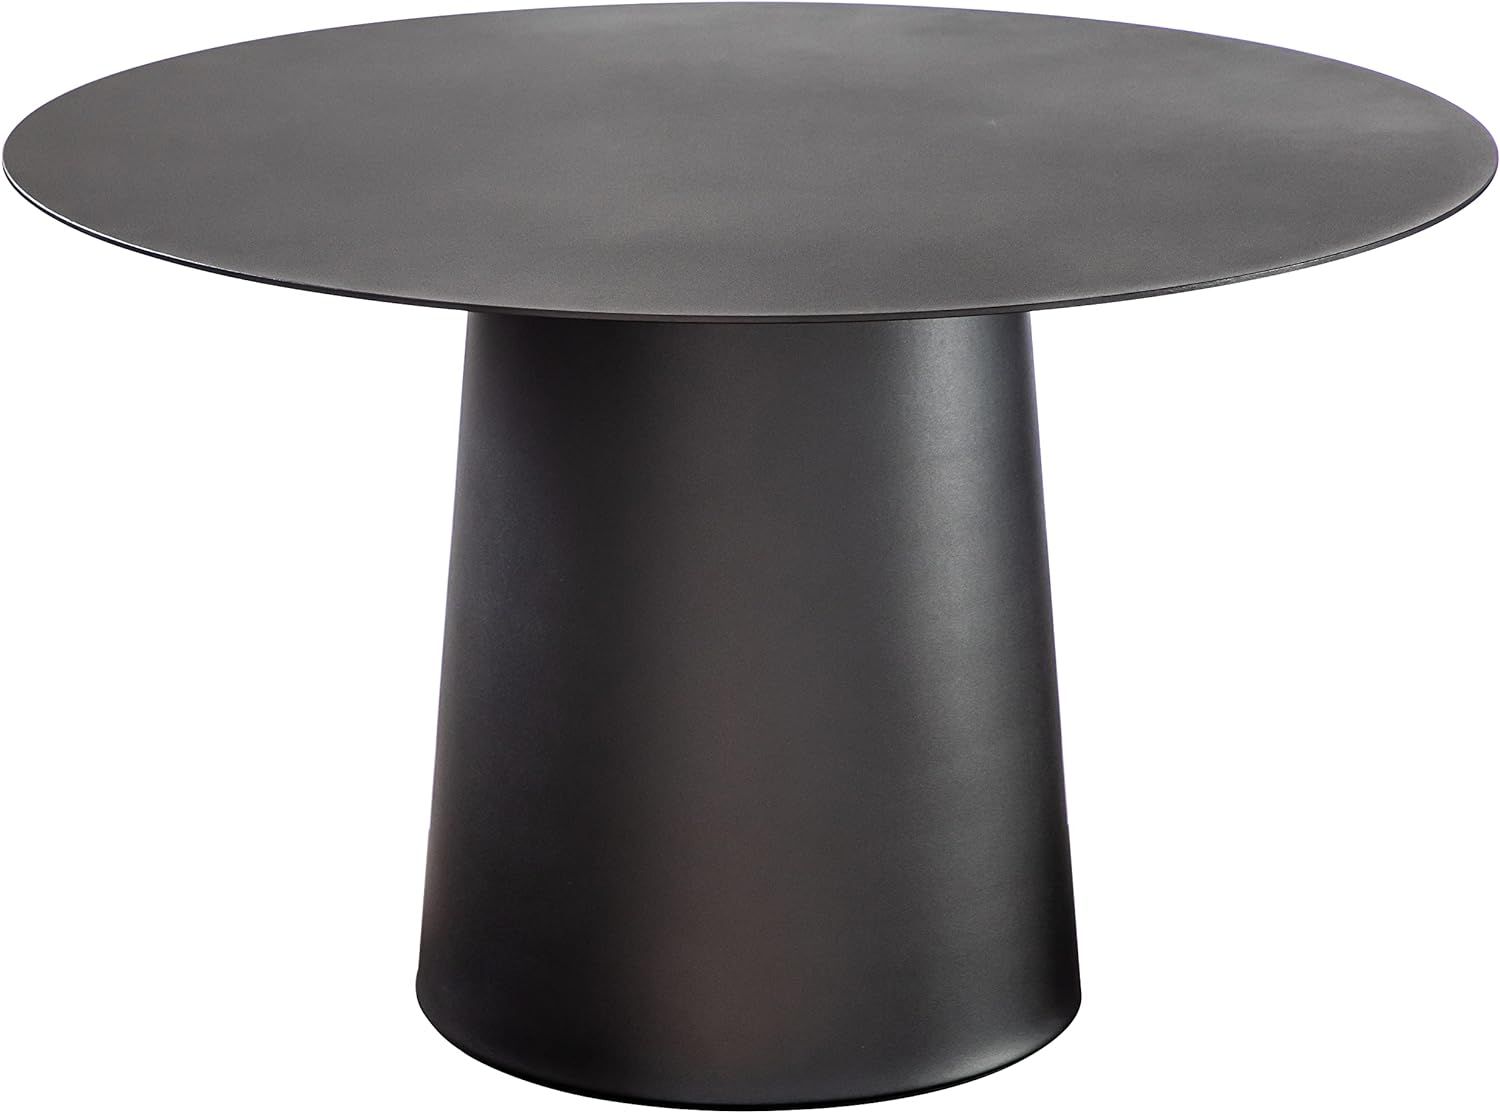 W24 in. Small Black Round Coffee Table Contemporary Coffee Table Metal Single Circle Coffee Table... | Amazon (US)